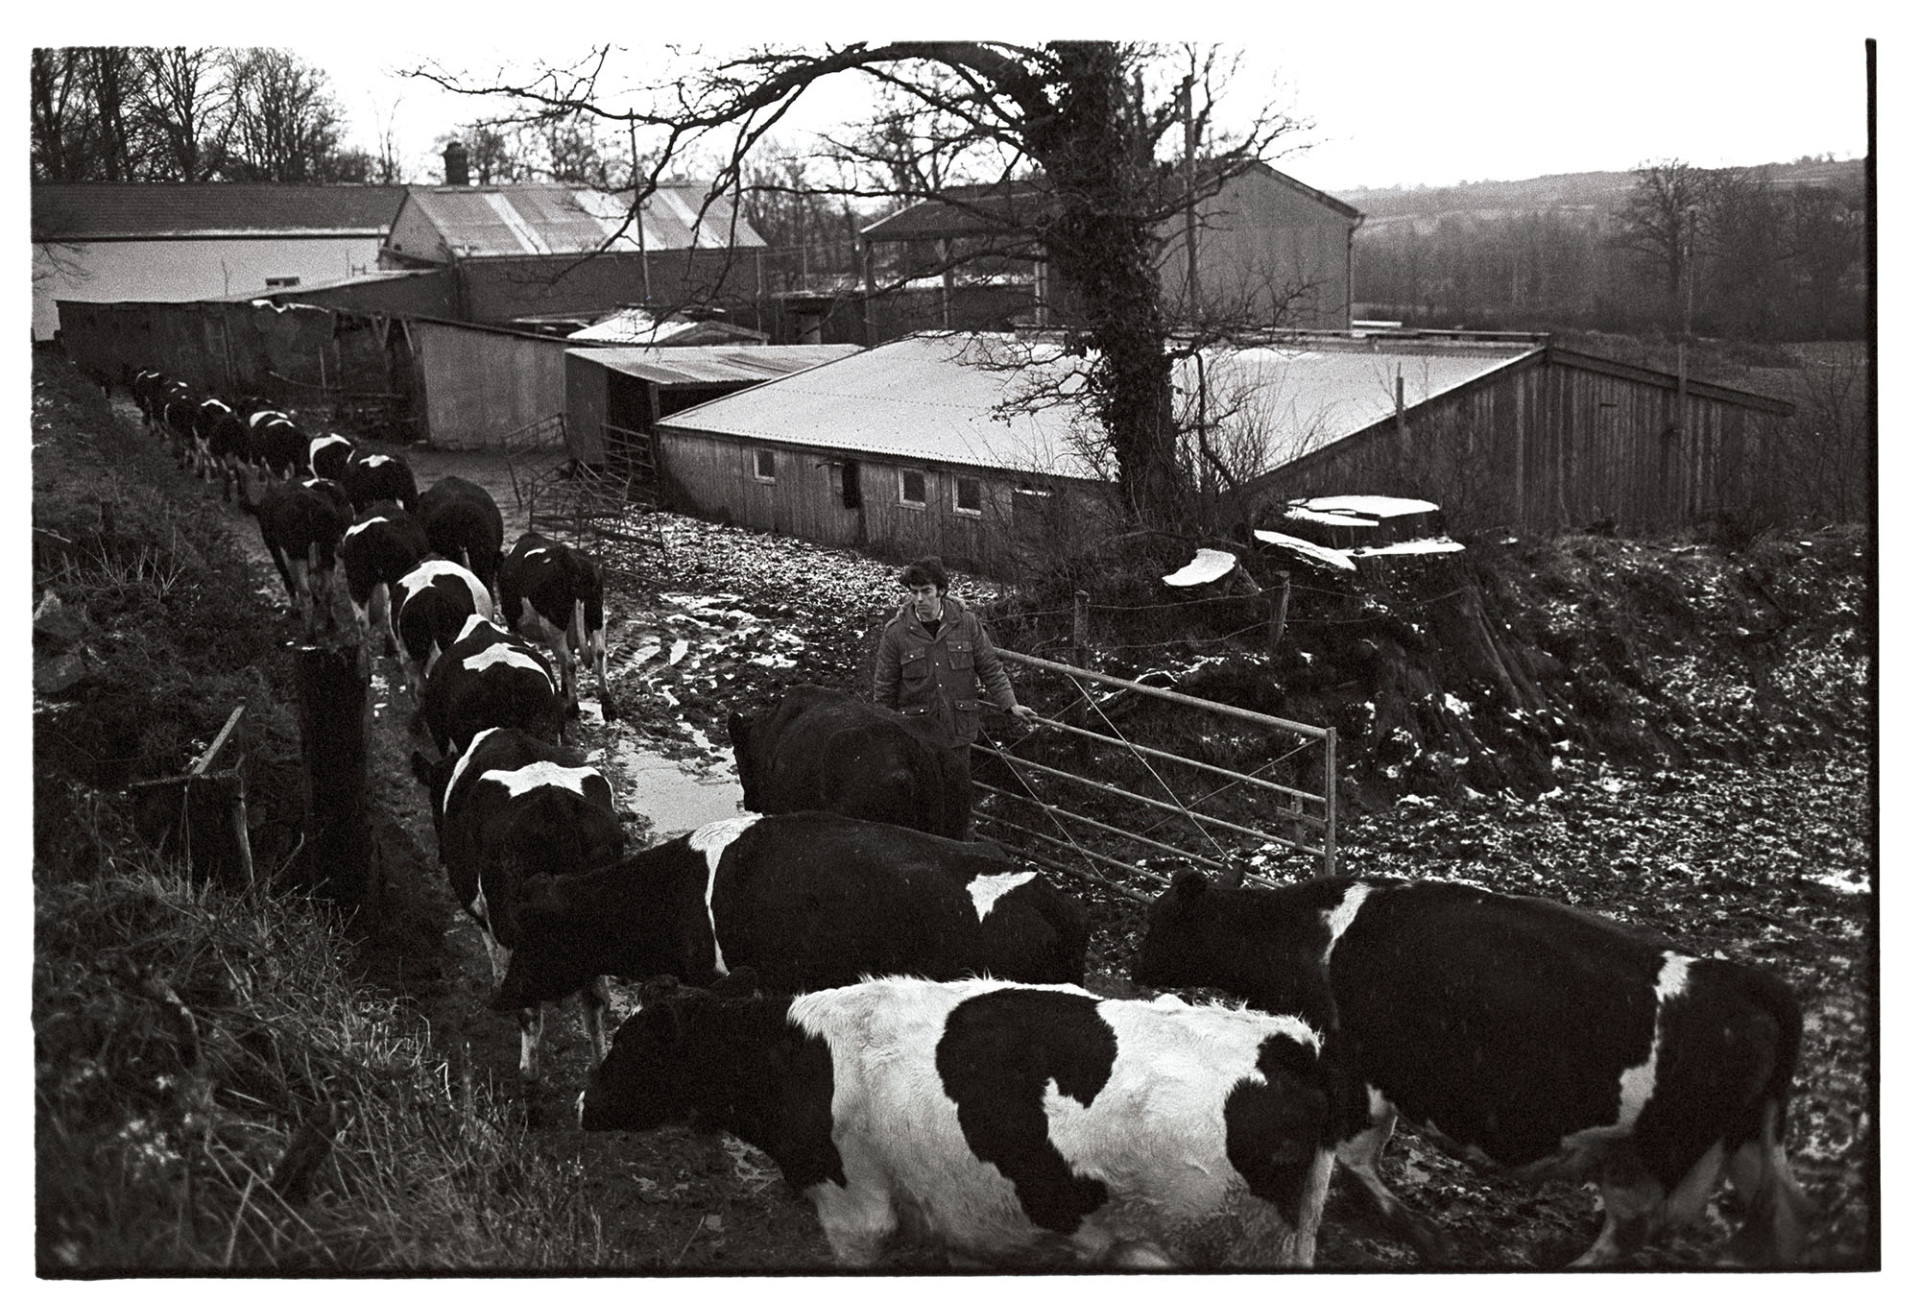 Cows coming in to be milked.
[Graham Ward opening a gate for cows walking into Parsonage Farm, Iddesleigh to be milked. Some snow is on the ground and various farm buildings can be seen behind a tree.]